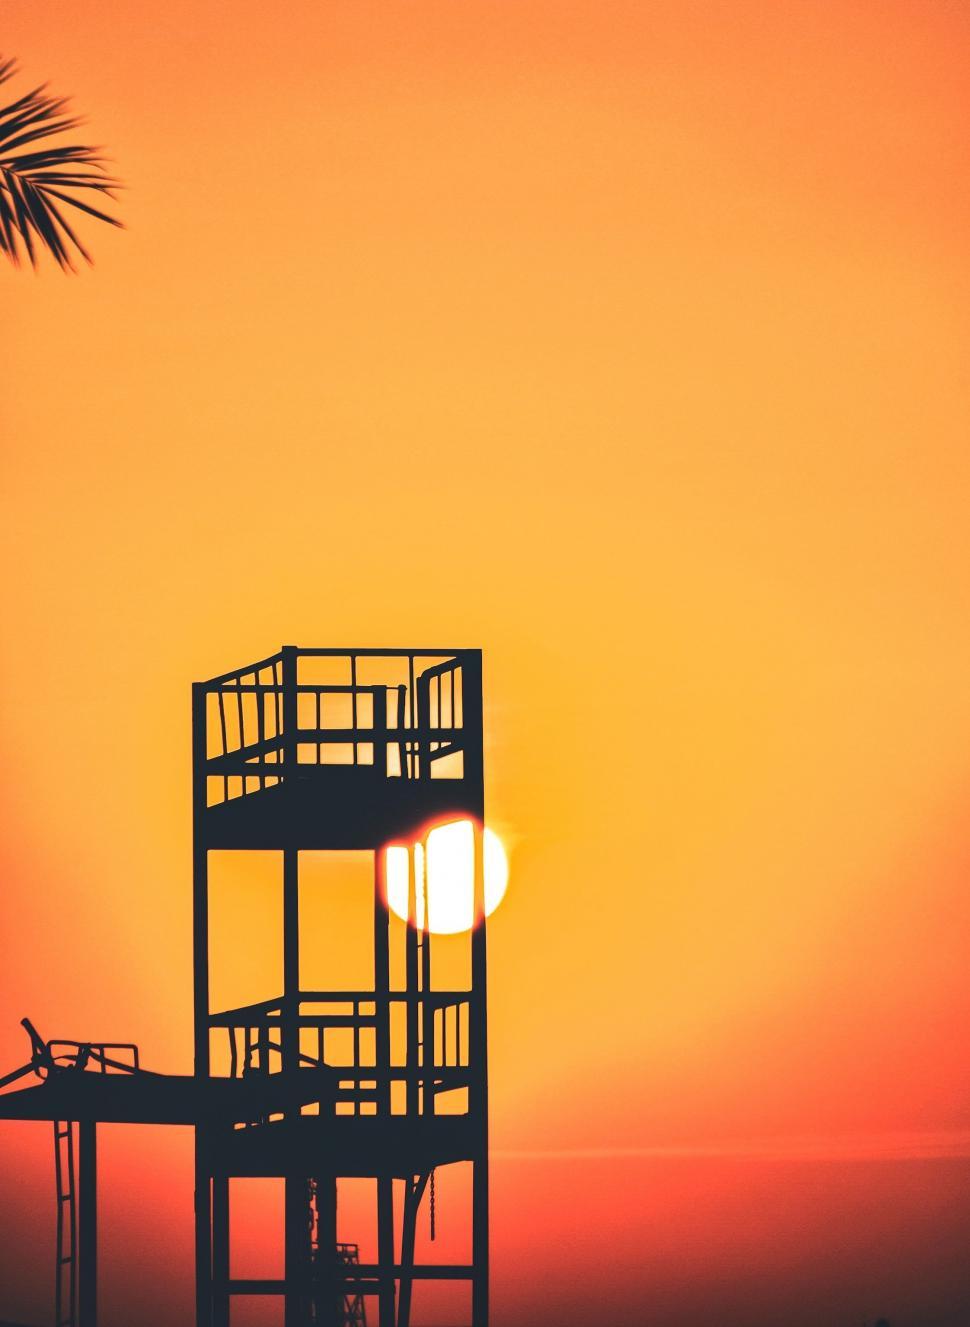 Free Image of The Sun Setting Behind a Lifeguard Tower 